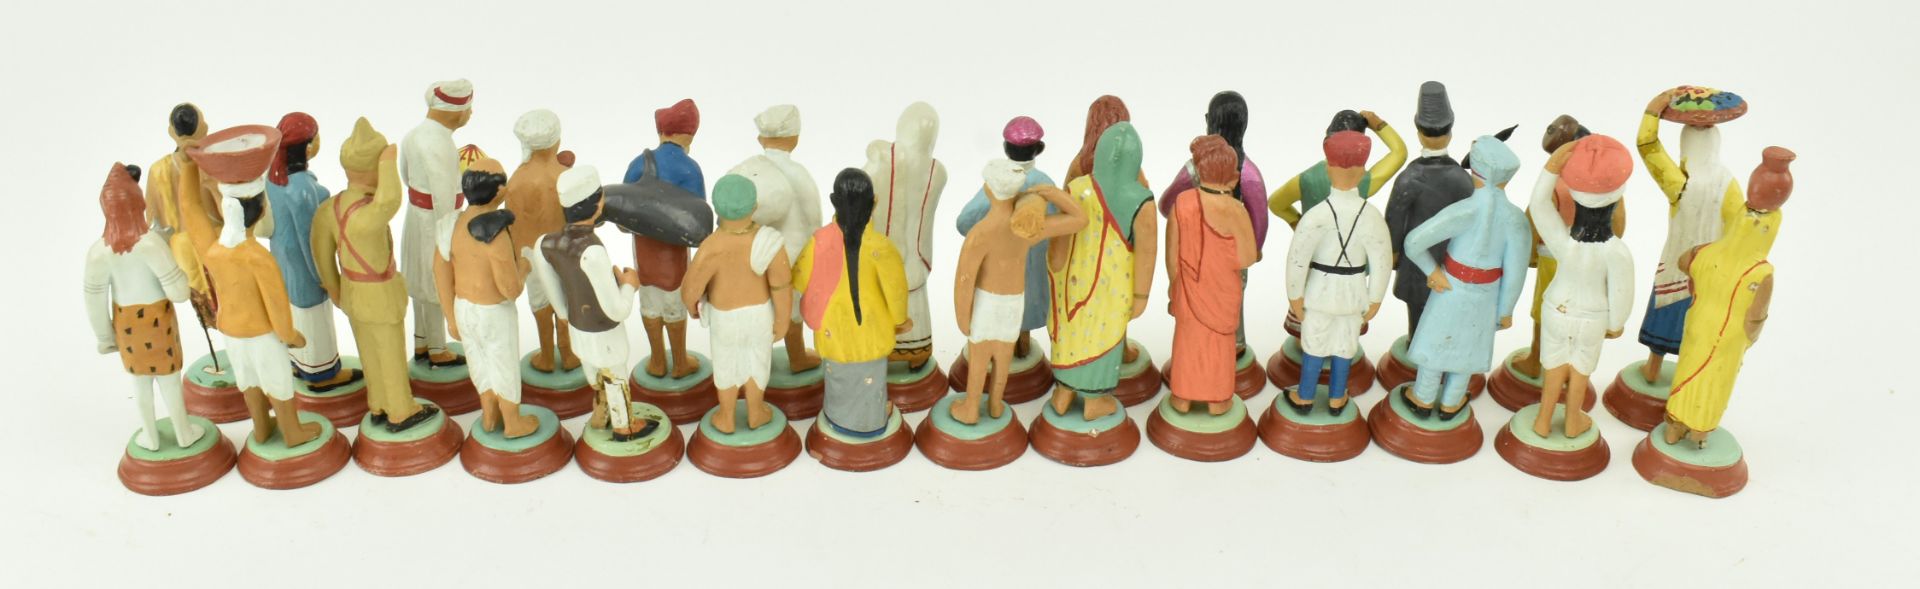 COLLECTION OF 28 INDIAN CLAY TERRACOTTA OVER WIRE FIGURINES - Image 5 of 6